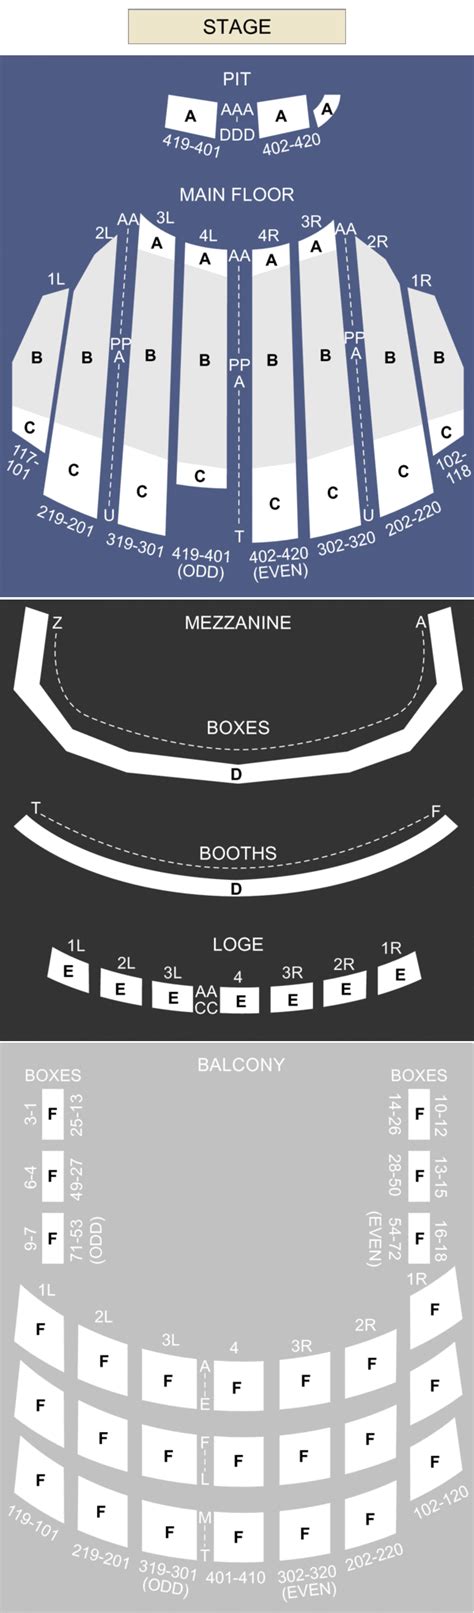 Chicago Theater Interactive Seating Chart